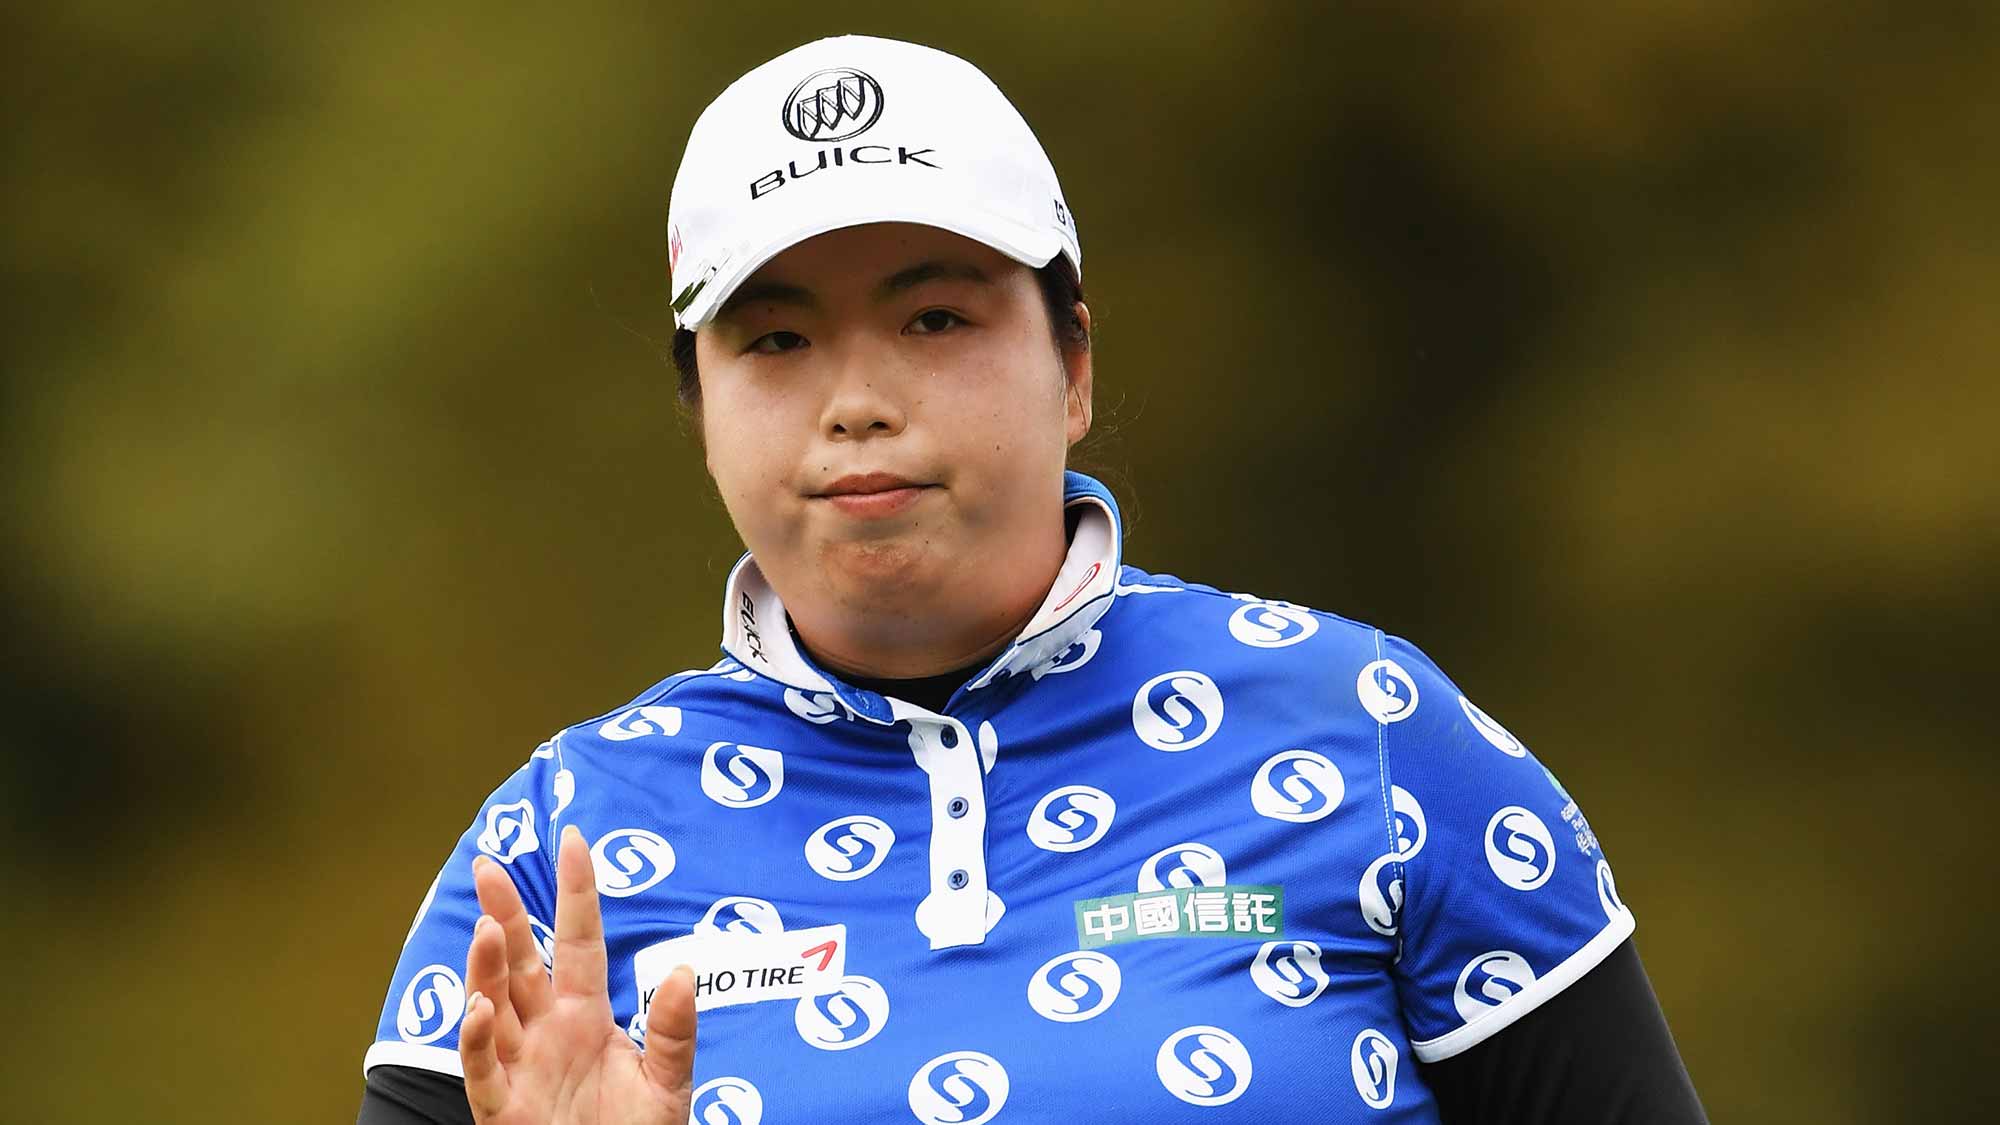 Shanshan Feng of China reacts to a putt during the second round of The Evian Championship